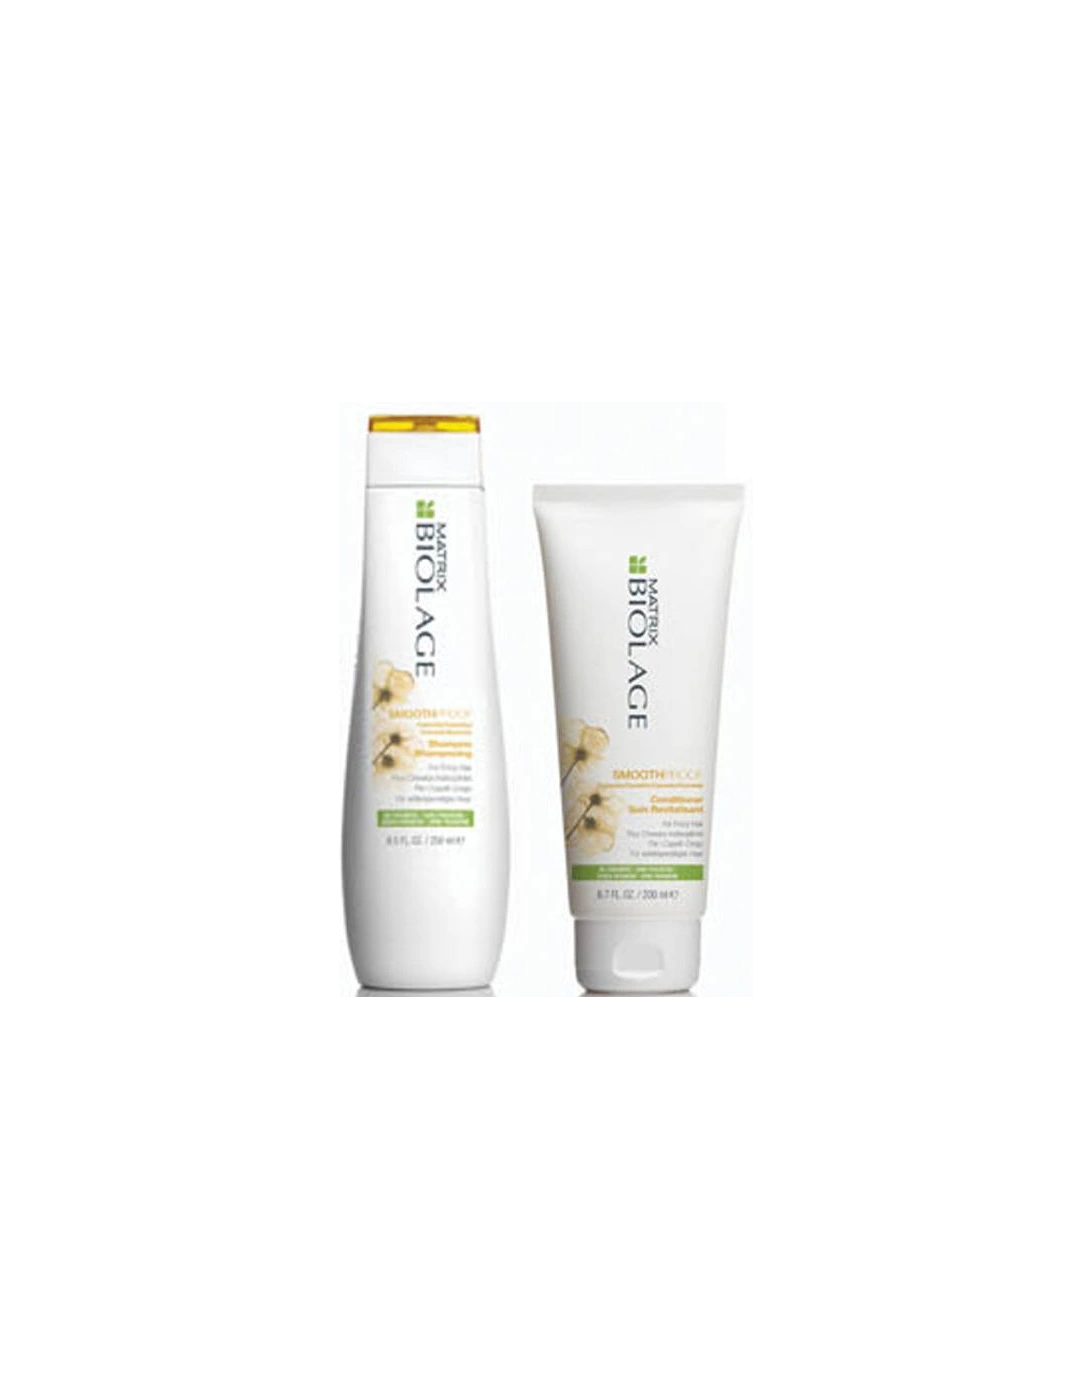 SmoothProof Shampoo and Conditioner for Frizzy Hair - Biolage, 2 of 1